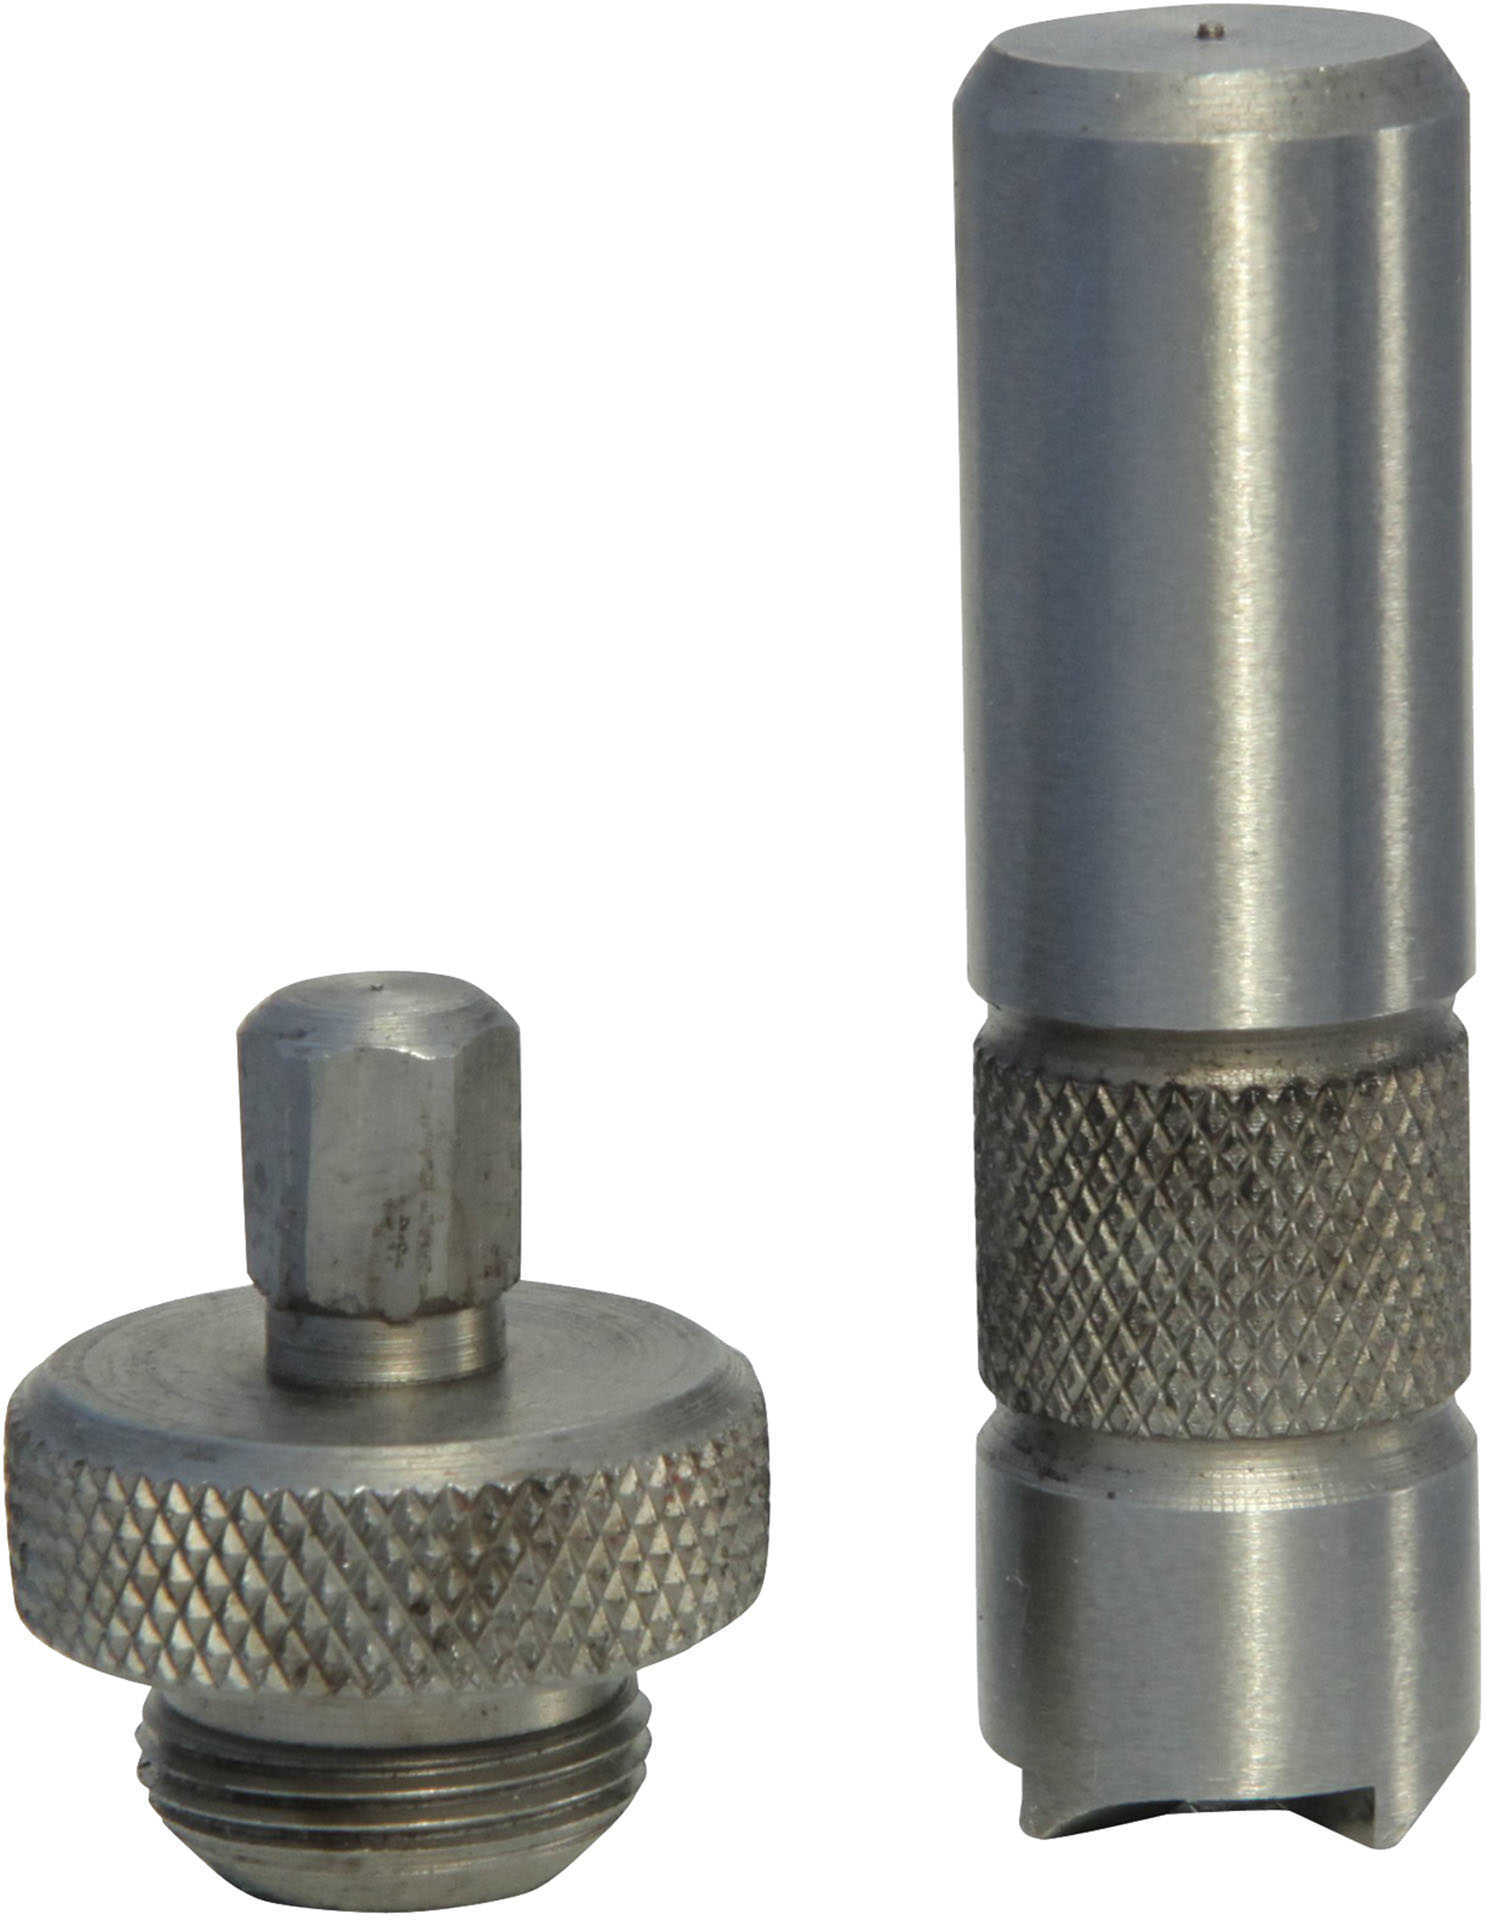 Lee Case Trimmer And Lock Stud